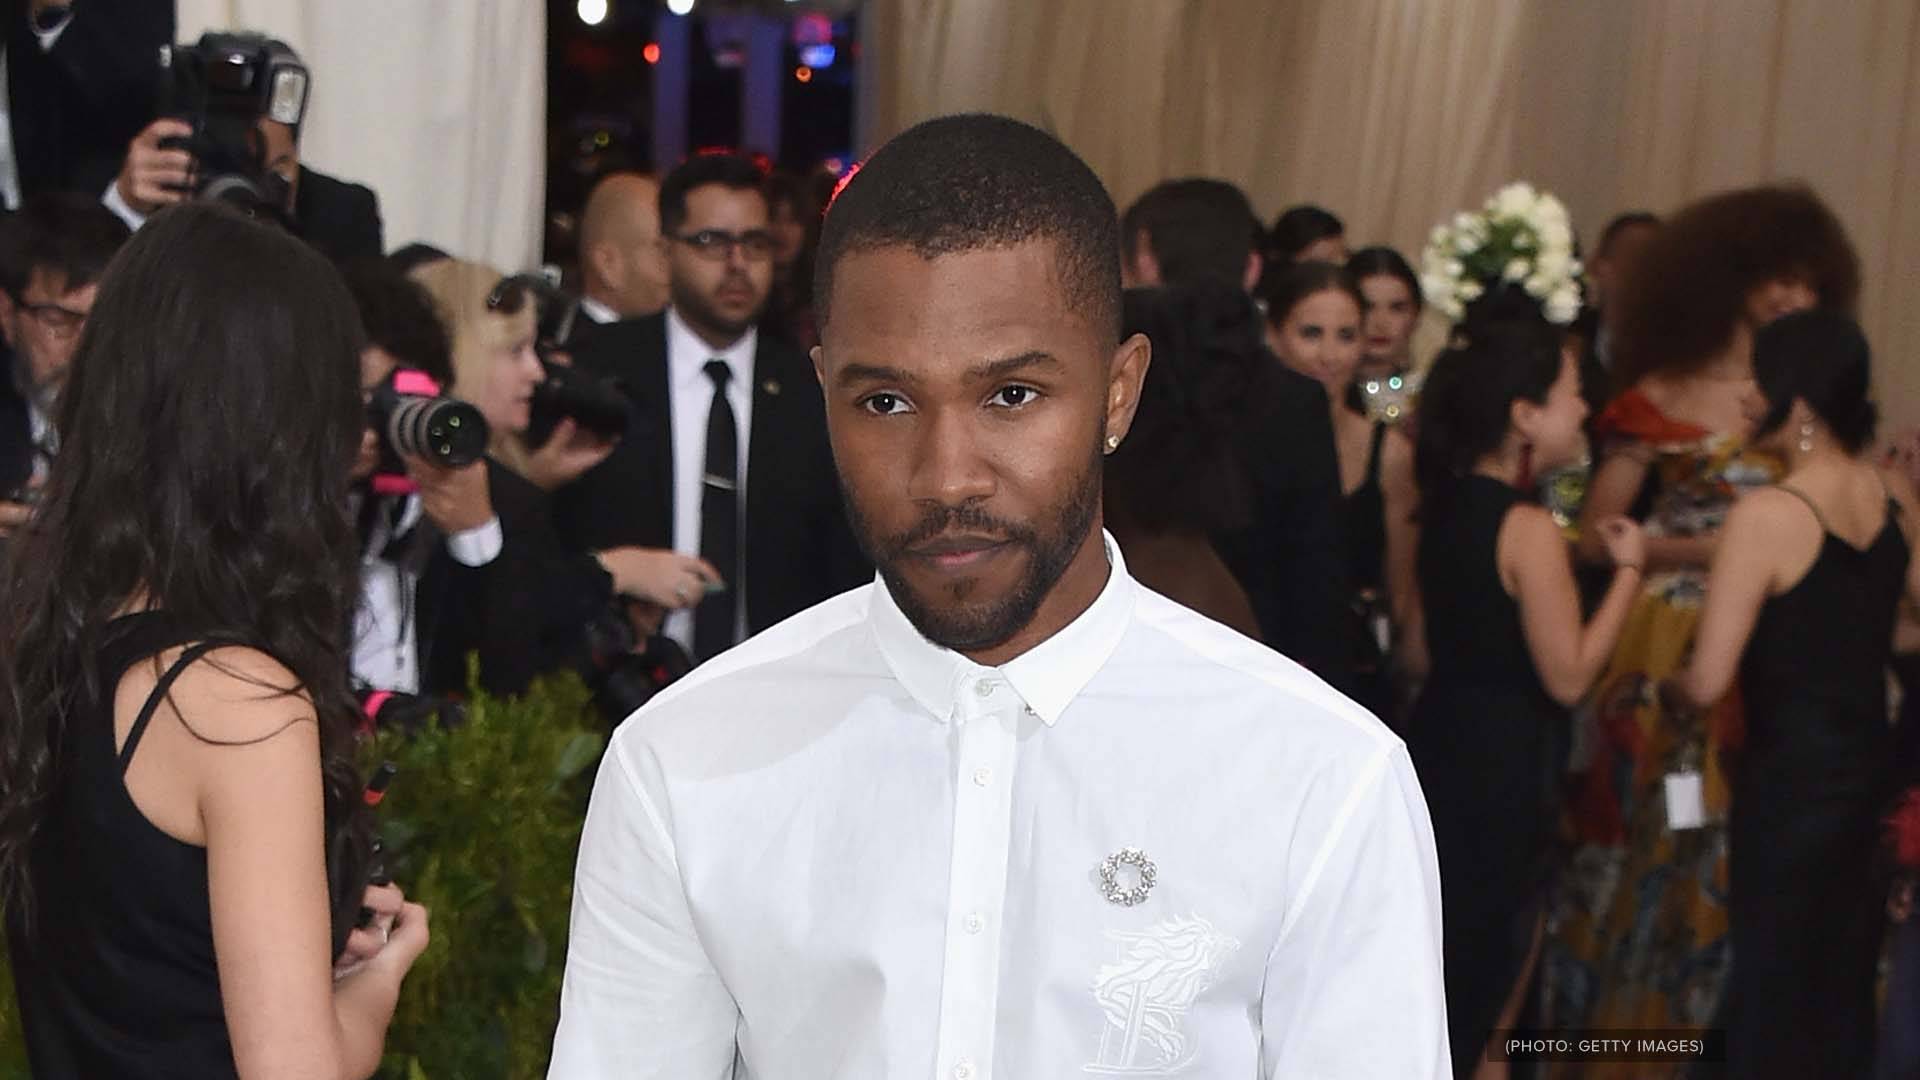 Check out what Frank Ocean inspired course plans to cover.